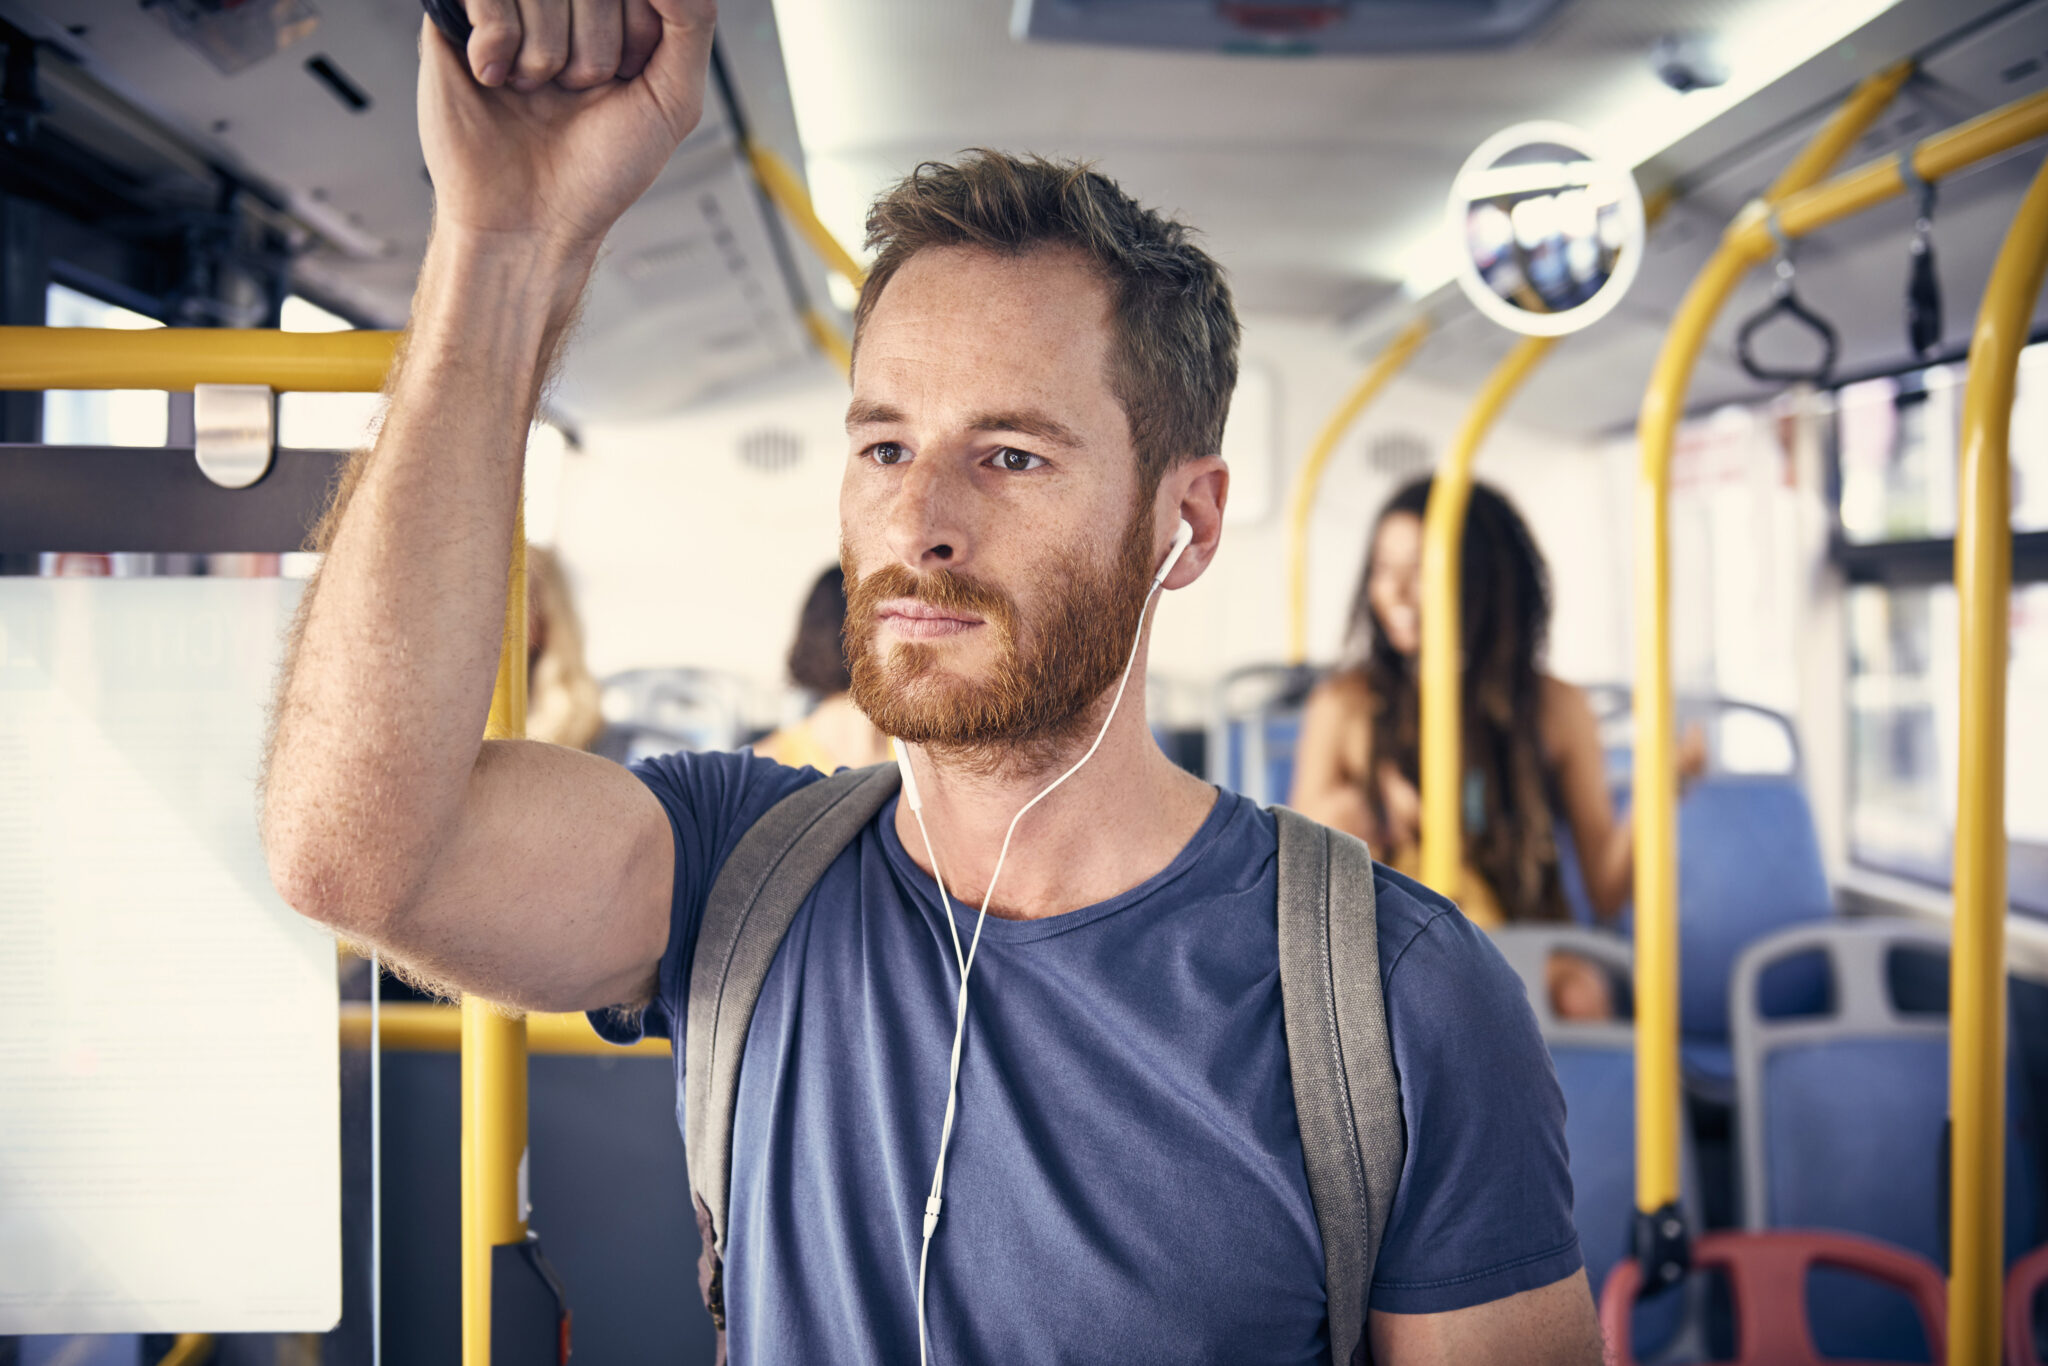 Portrait of young man with headphones in a bus